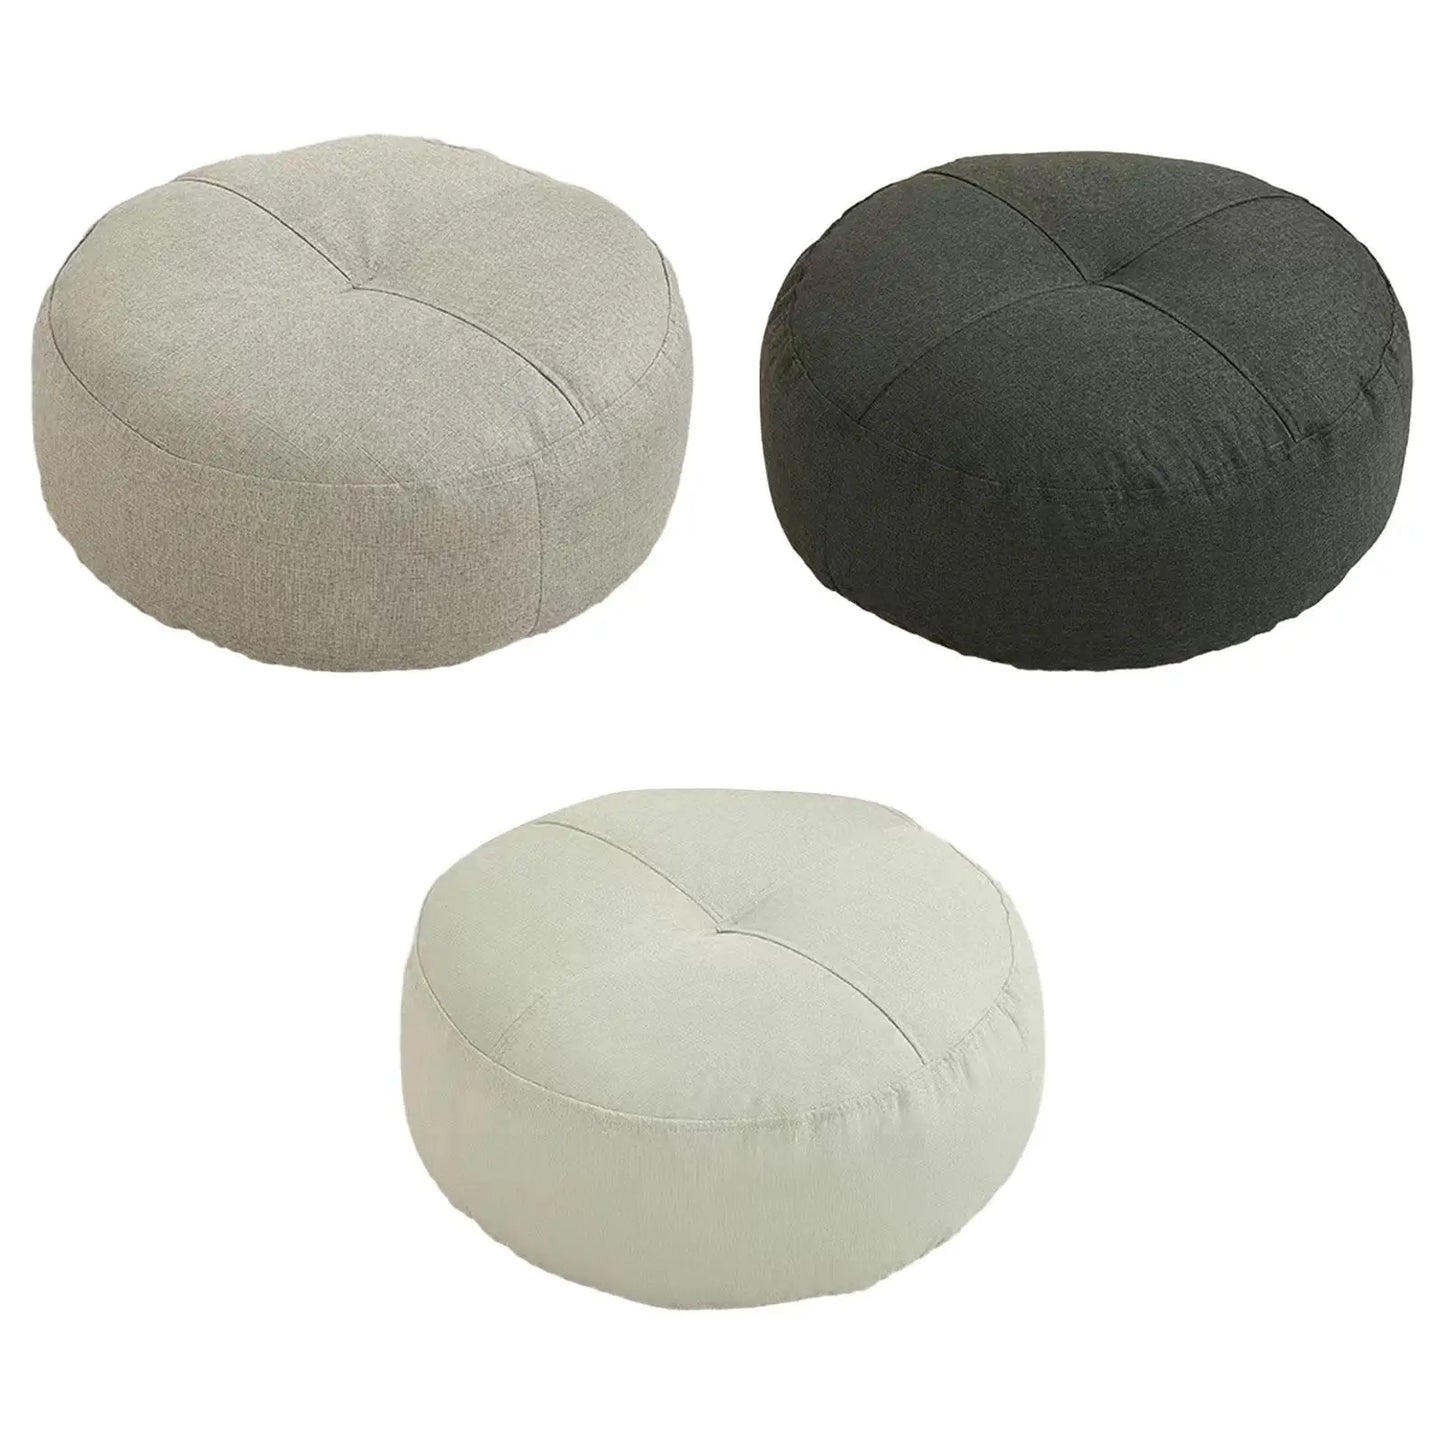 Round Floor Pillow Small Multifunctional Meditation Cushion for Floor Seating Chair Sofa Yoga Adults Kids Bedroom Living Room